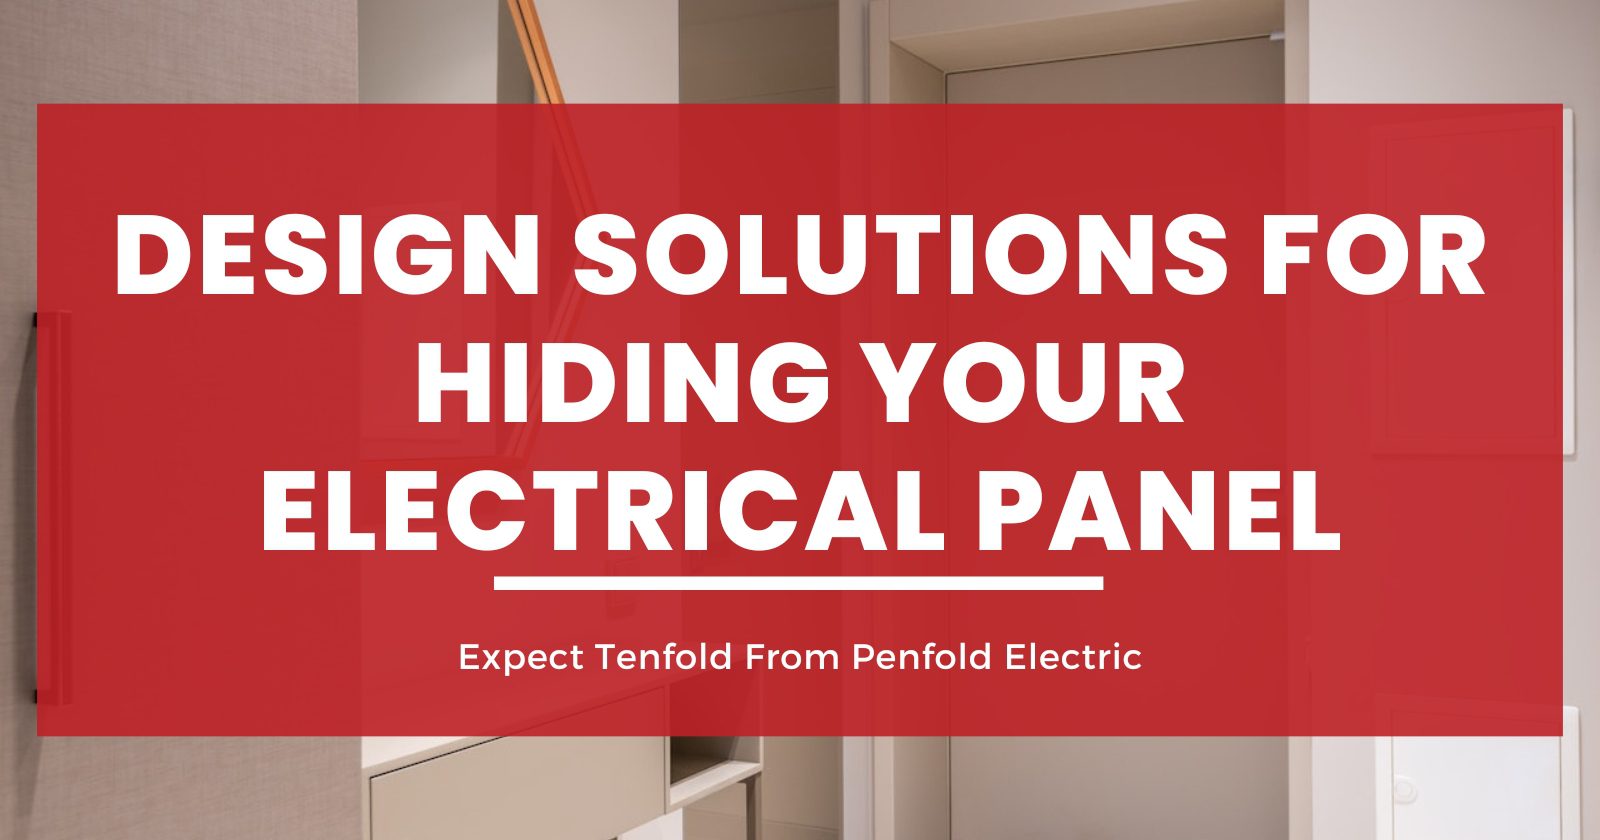 Design Solutions for Hiding Your Electrical Panel